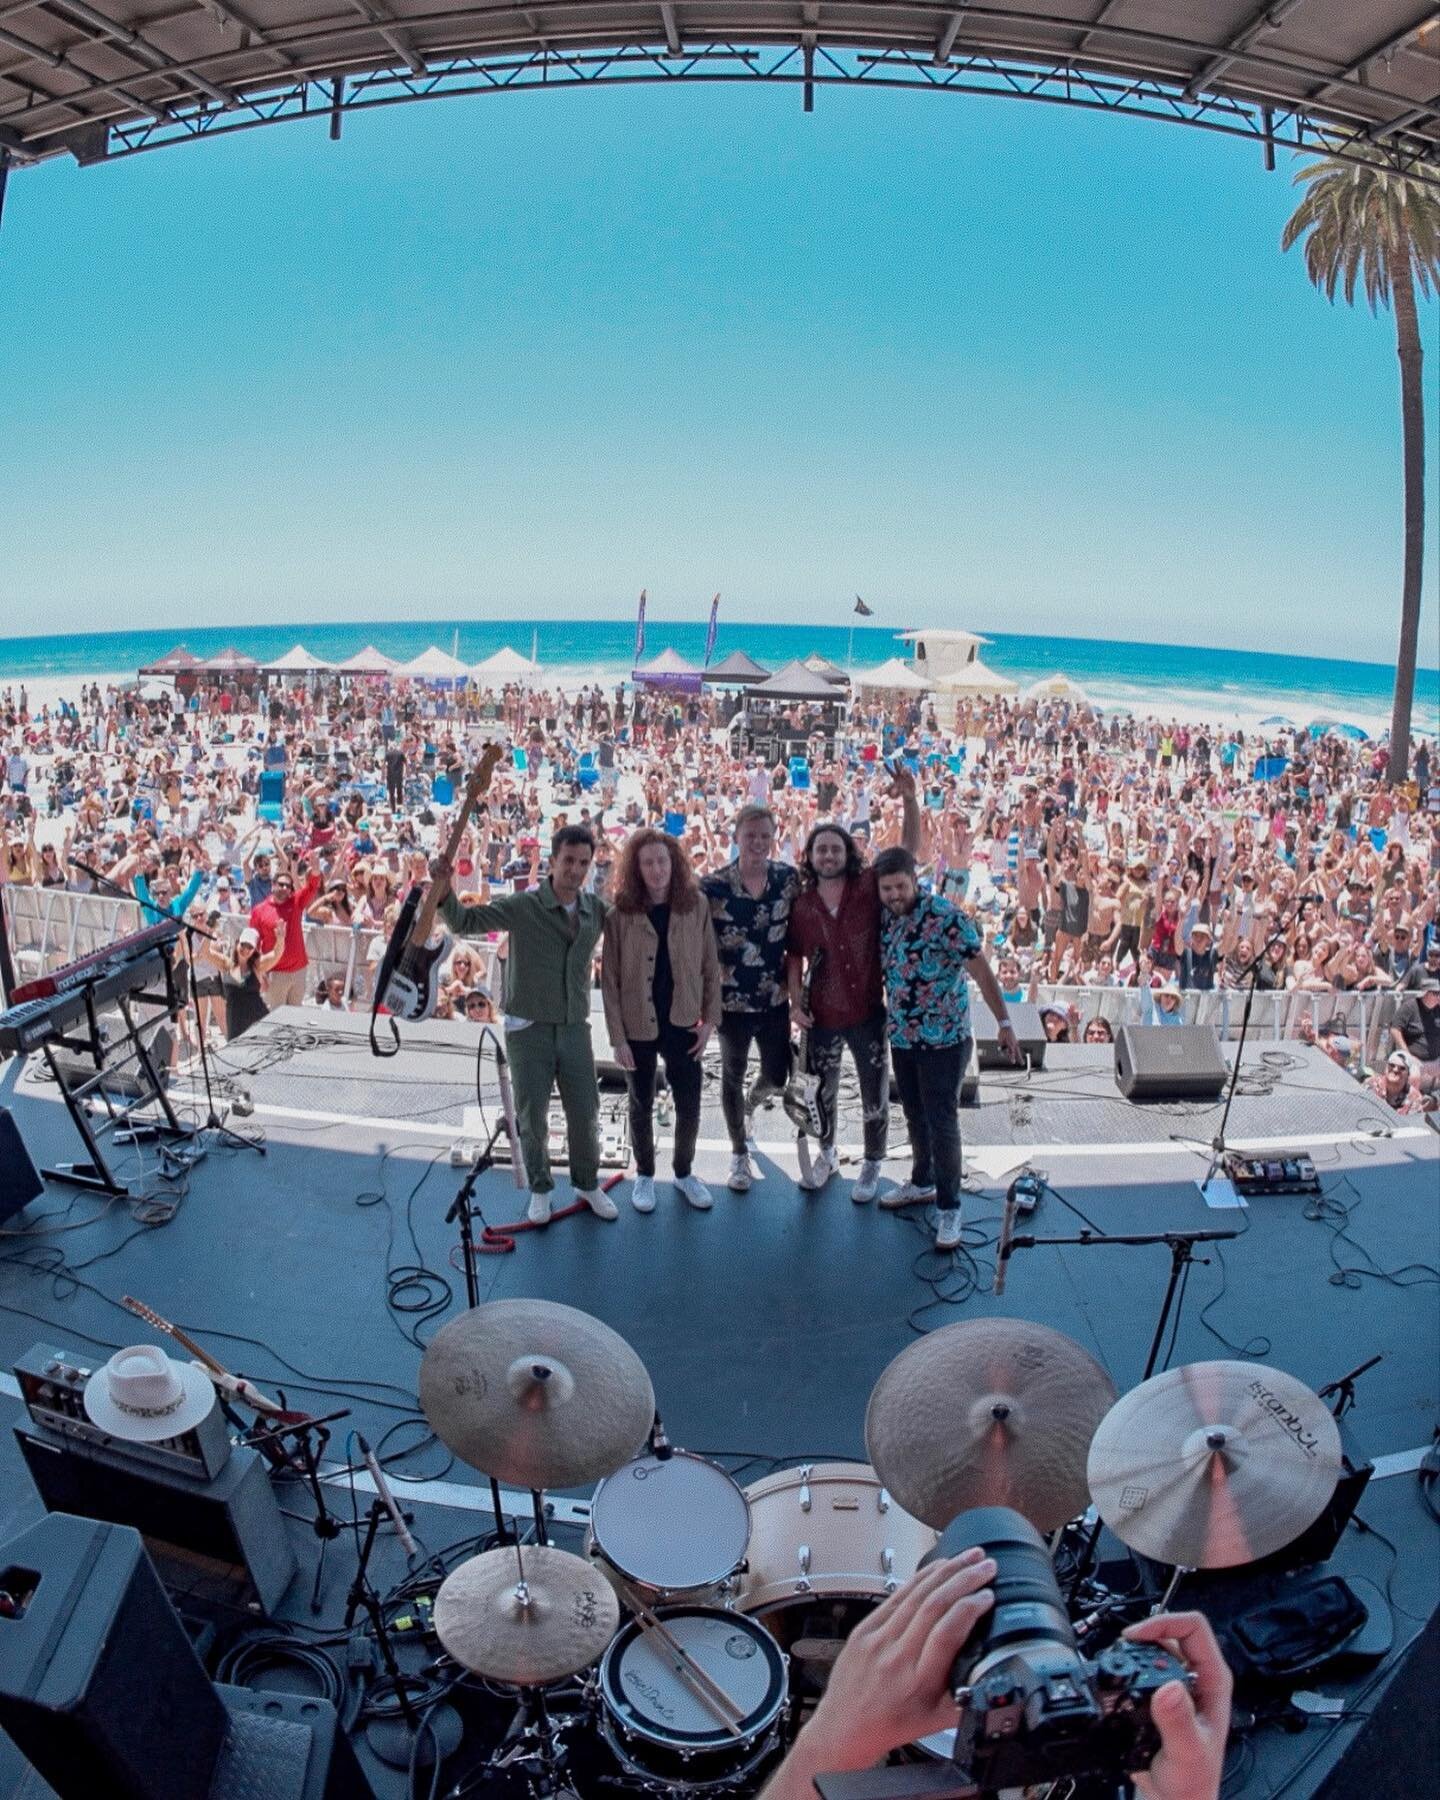 Thank you to everyone who came out to @switchfootbroam! We&rsquo;re so happy to see so many new faces while supporting a great cause in our community 💙

Huge thanks to @switchfoot for having us as well as @imperfects for hooking us up with some swee